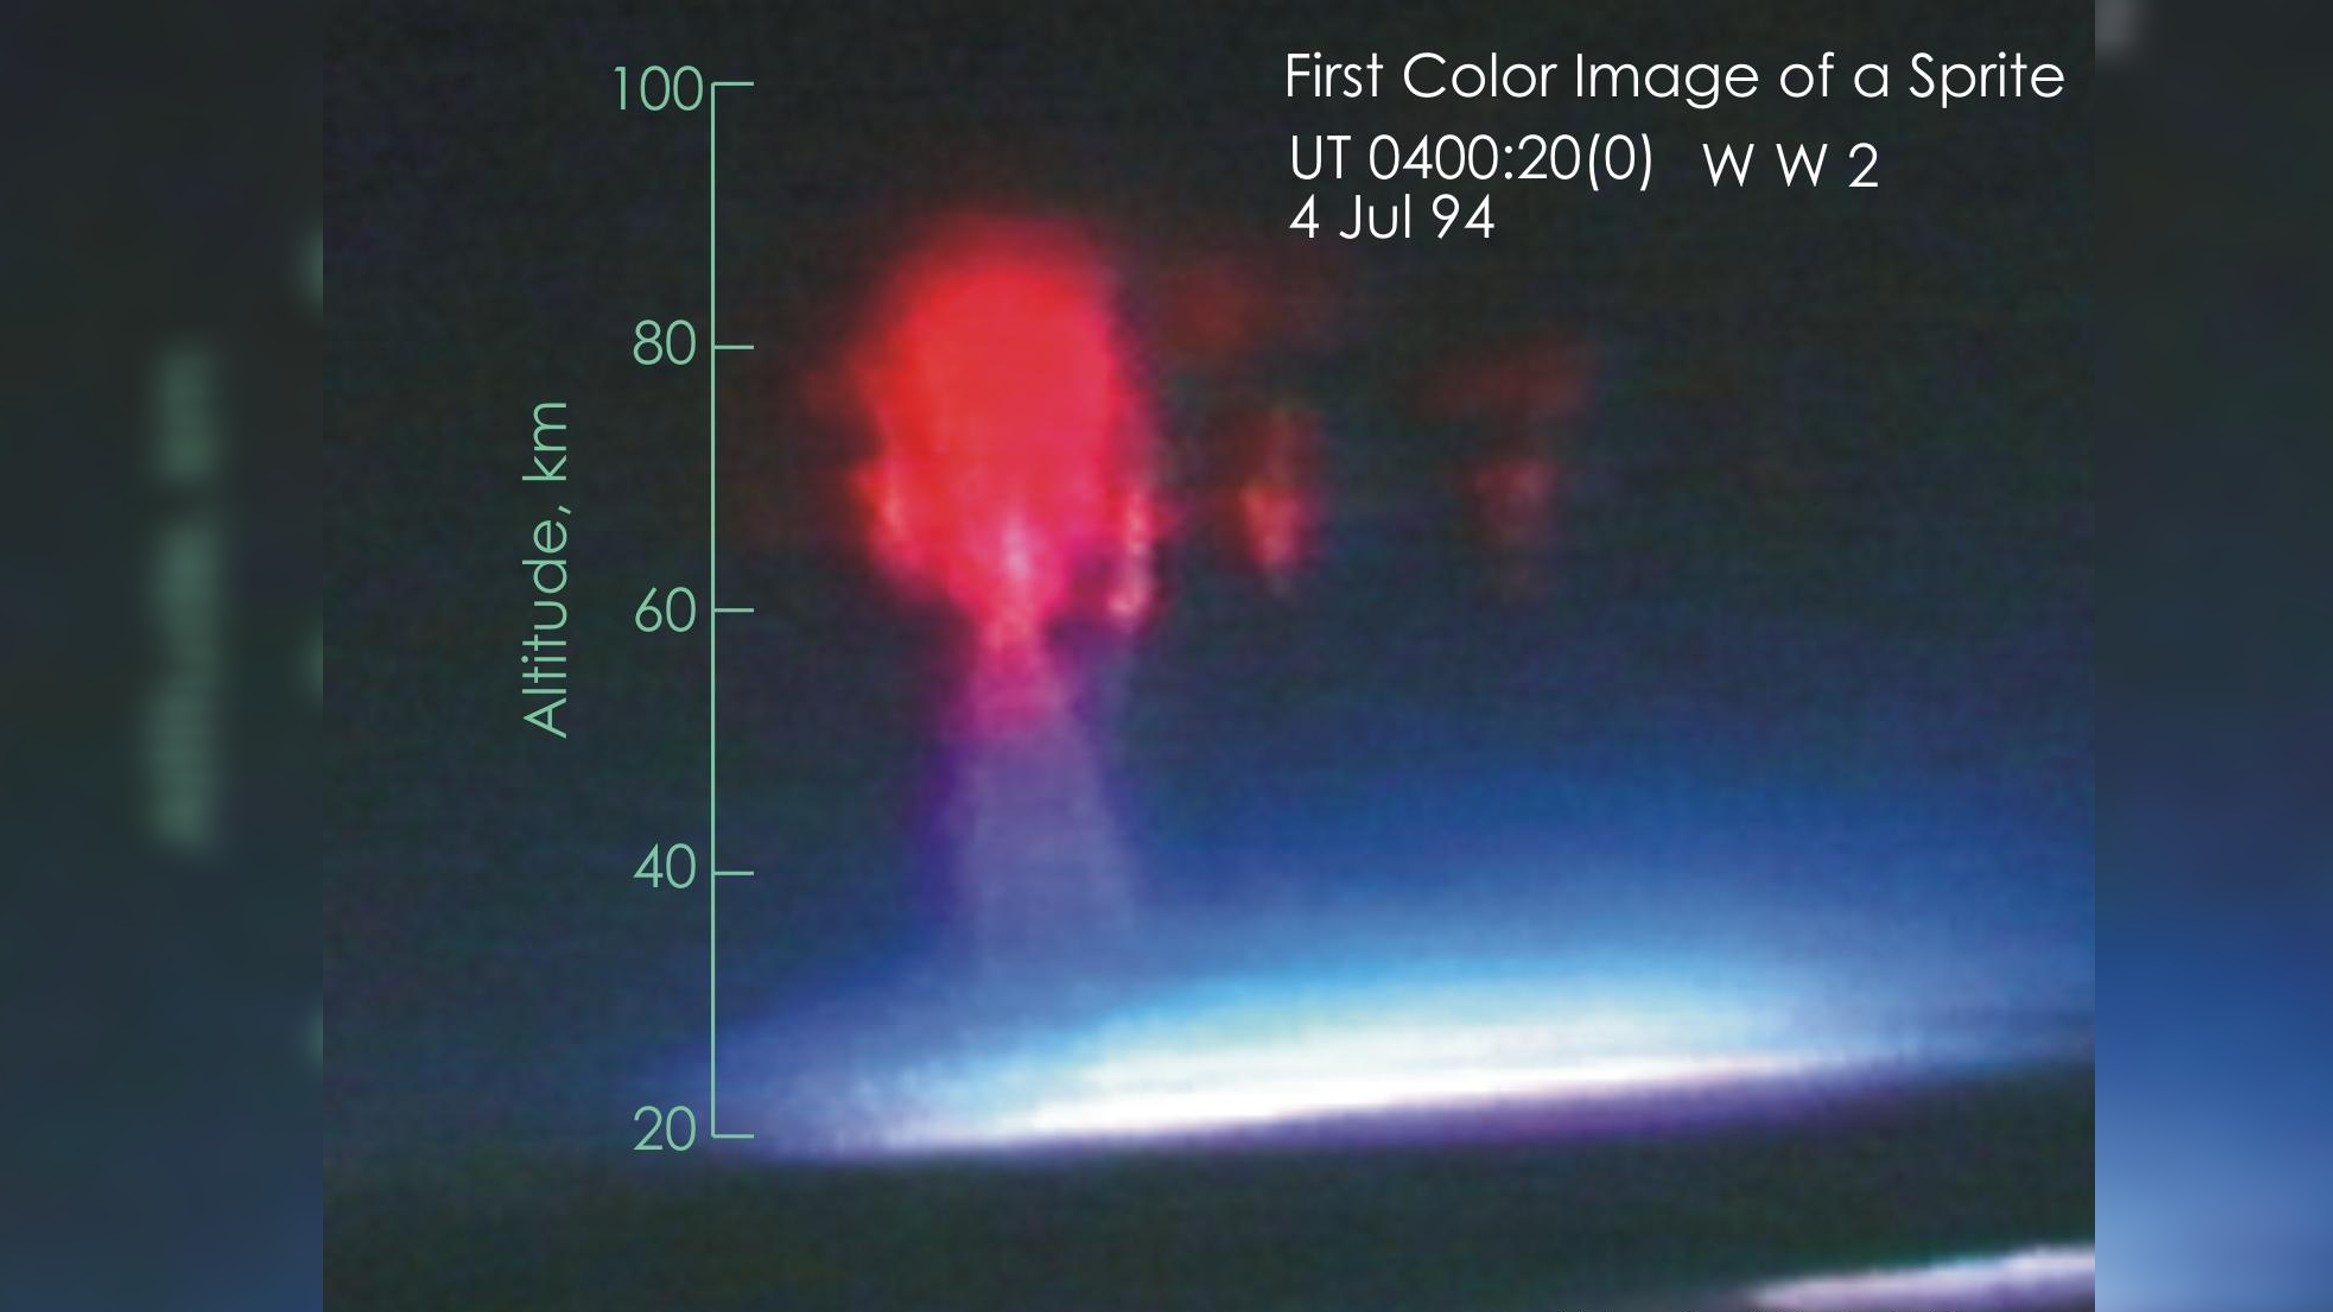 The first colour image taken of red lightning